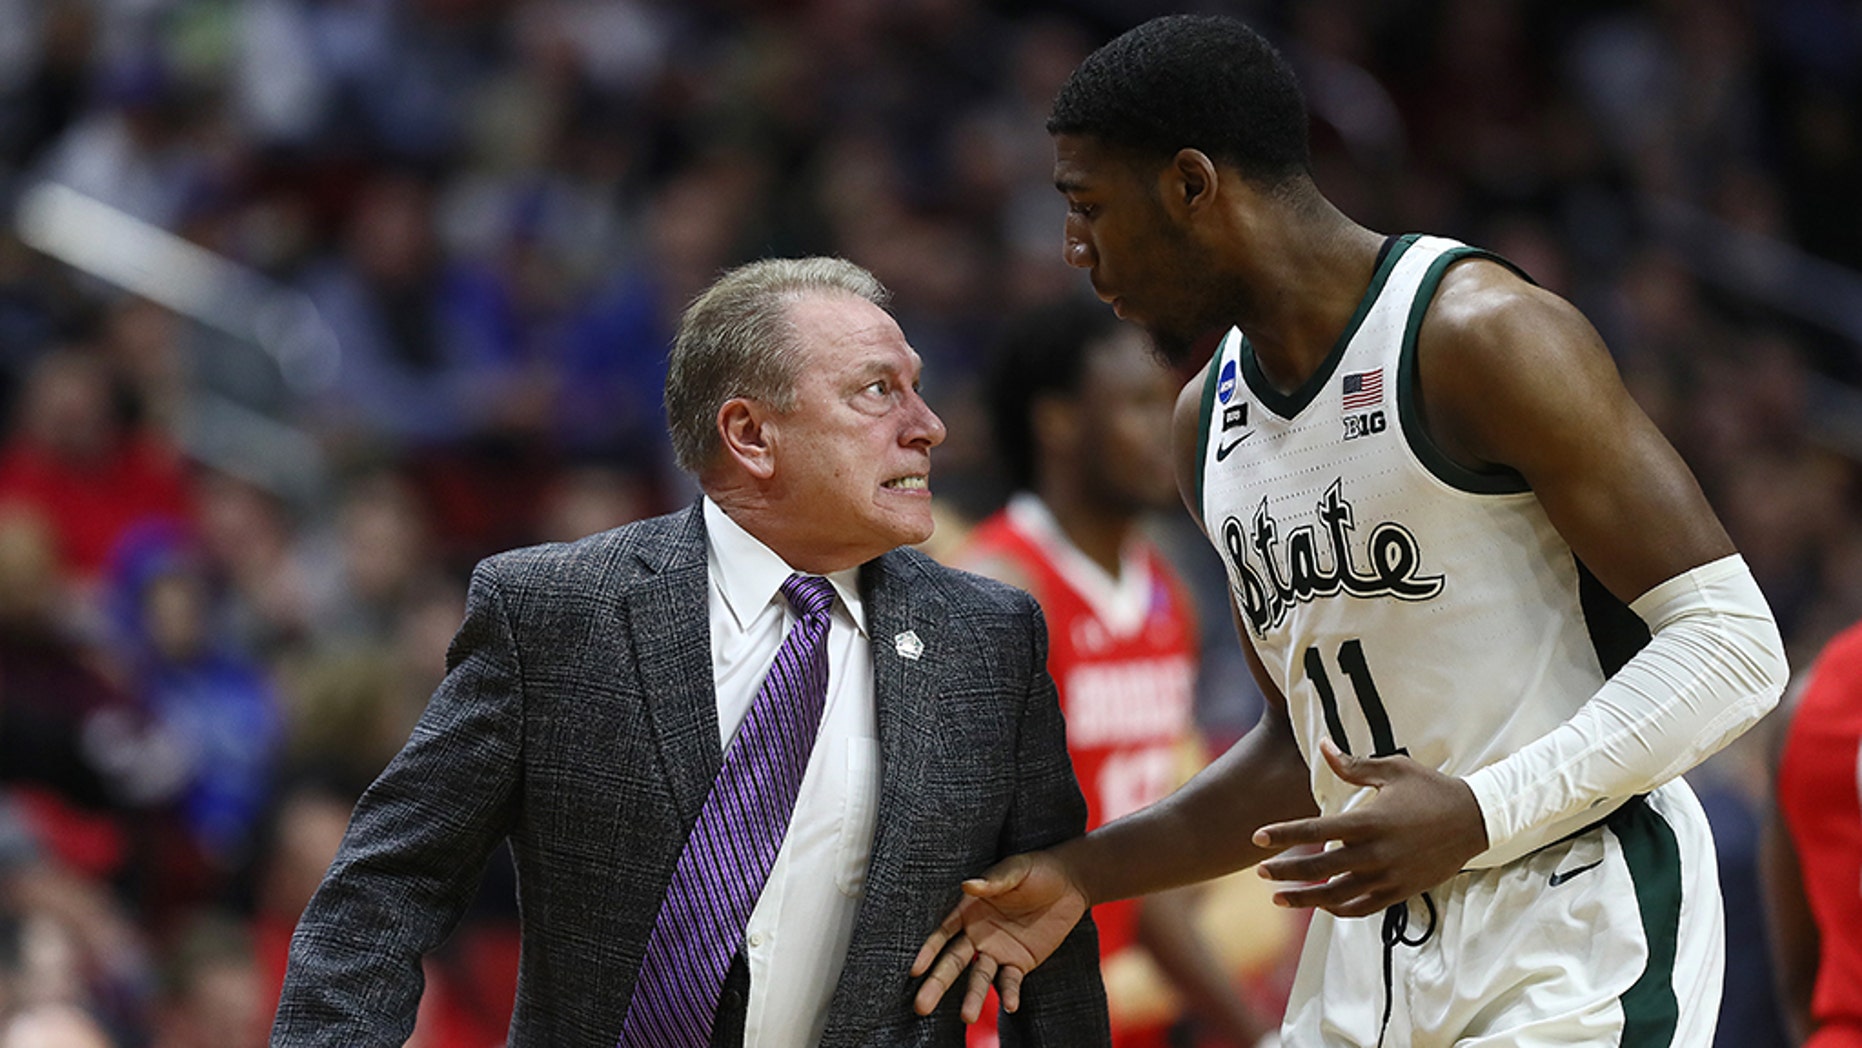 MOONS, IOWA - MARCH 21: Michigan State Spartans head coach Tom Izzo glares at Aaron Henry, # 11, after a play played in the first round of the NCAA basketball tournament against the Bradley Braves at the Wells Fargo Arena on March 21, 2019 in Des Moines, Iowa. (Photo of Jamie Squire / Getty Images)